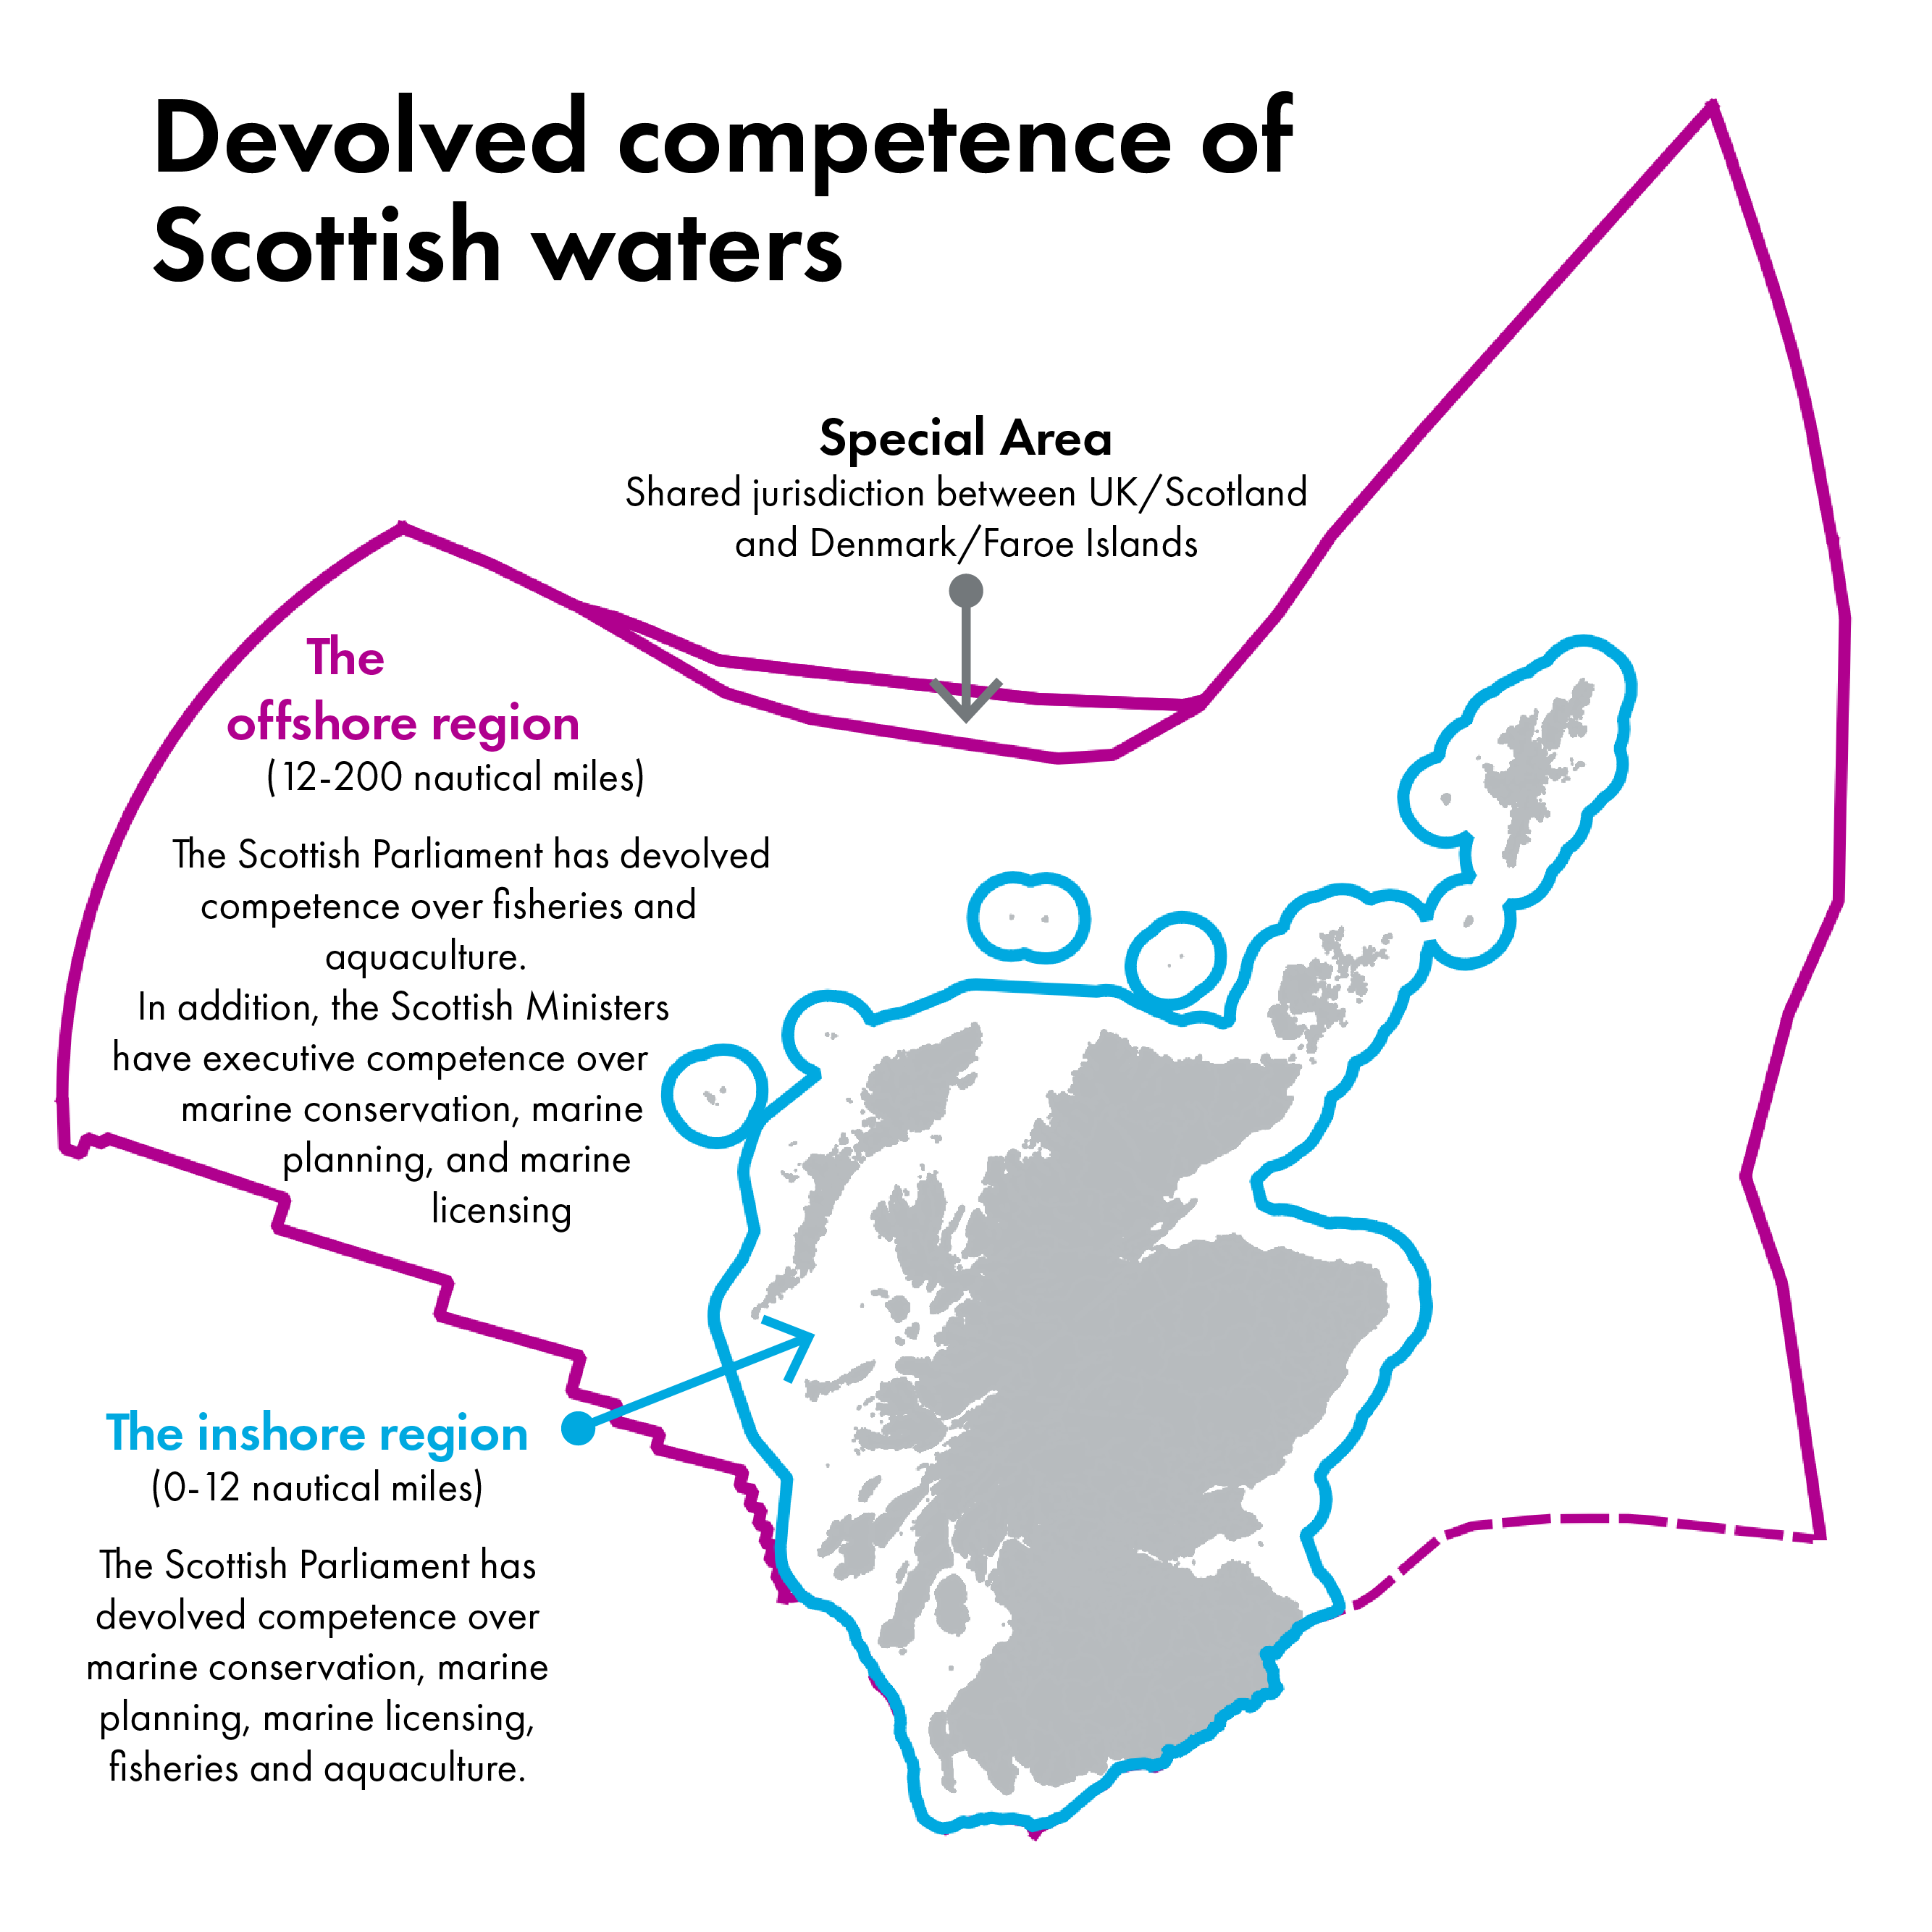 Map showing Scotland's marine boundaries and devolved competence of Scotland's waters.